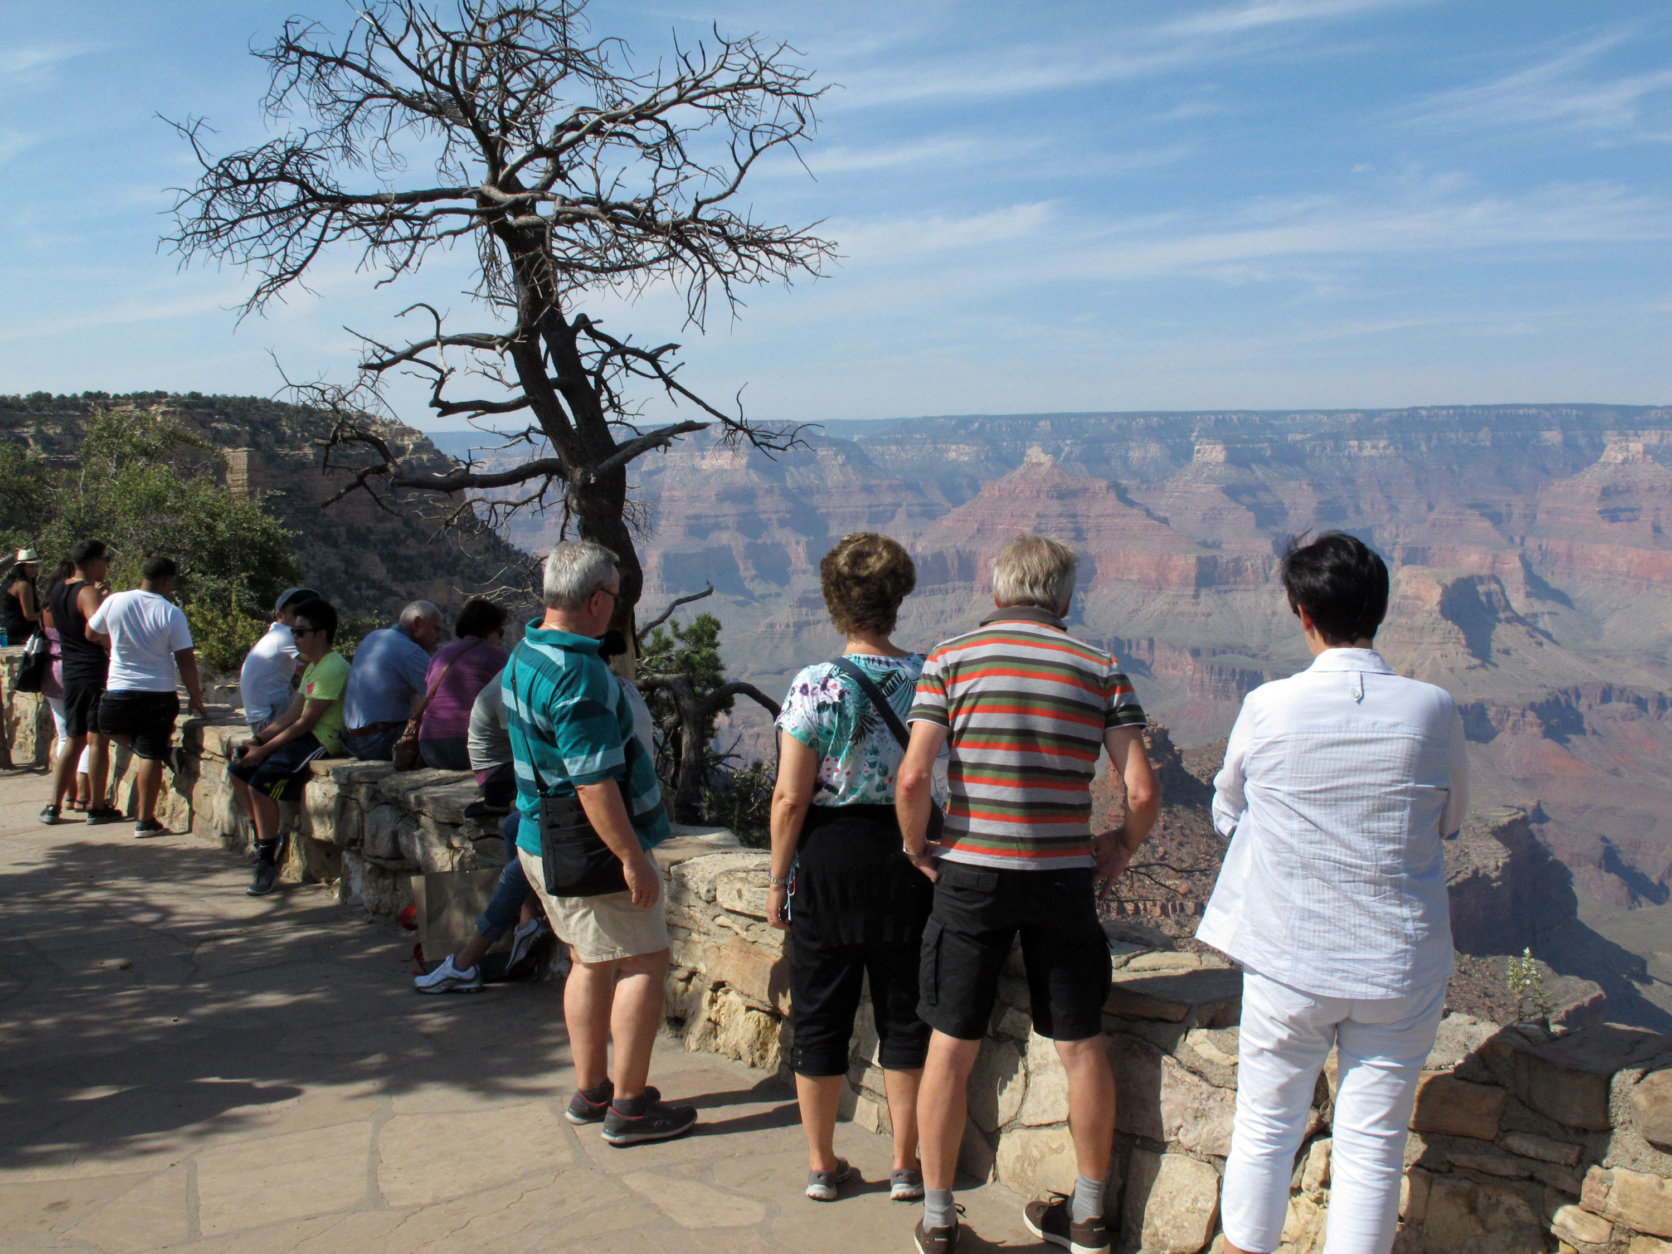 In this Wednesday, Aug. 19, 2015 photo, visitors line the South Rim of Grand Canyon National Park in northern Arizona. The Grand Canyon and other big national parks are seeing more visitors than usual this year, partly driven by good weather, cheap gas and marketing campaigns. (AP Photo/Felicia Fonseca)